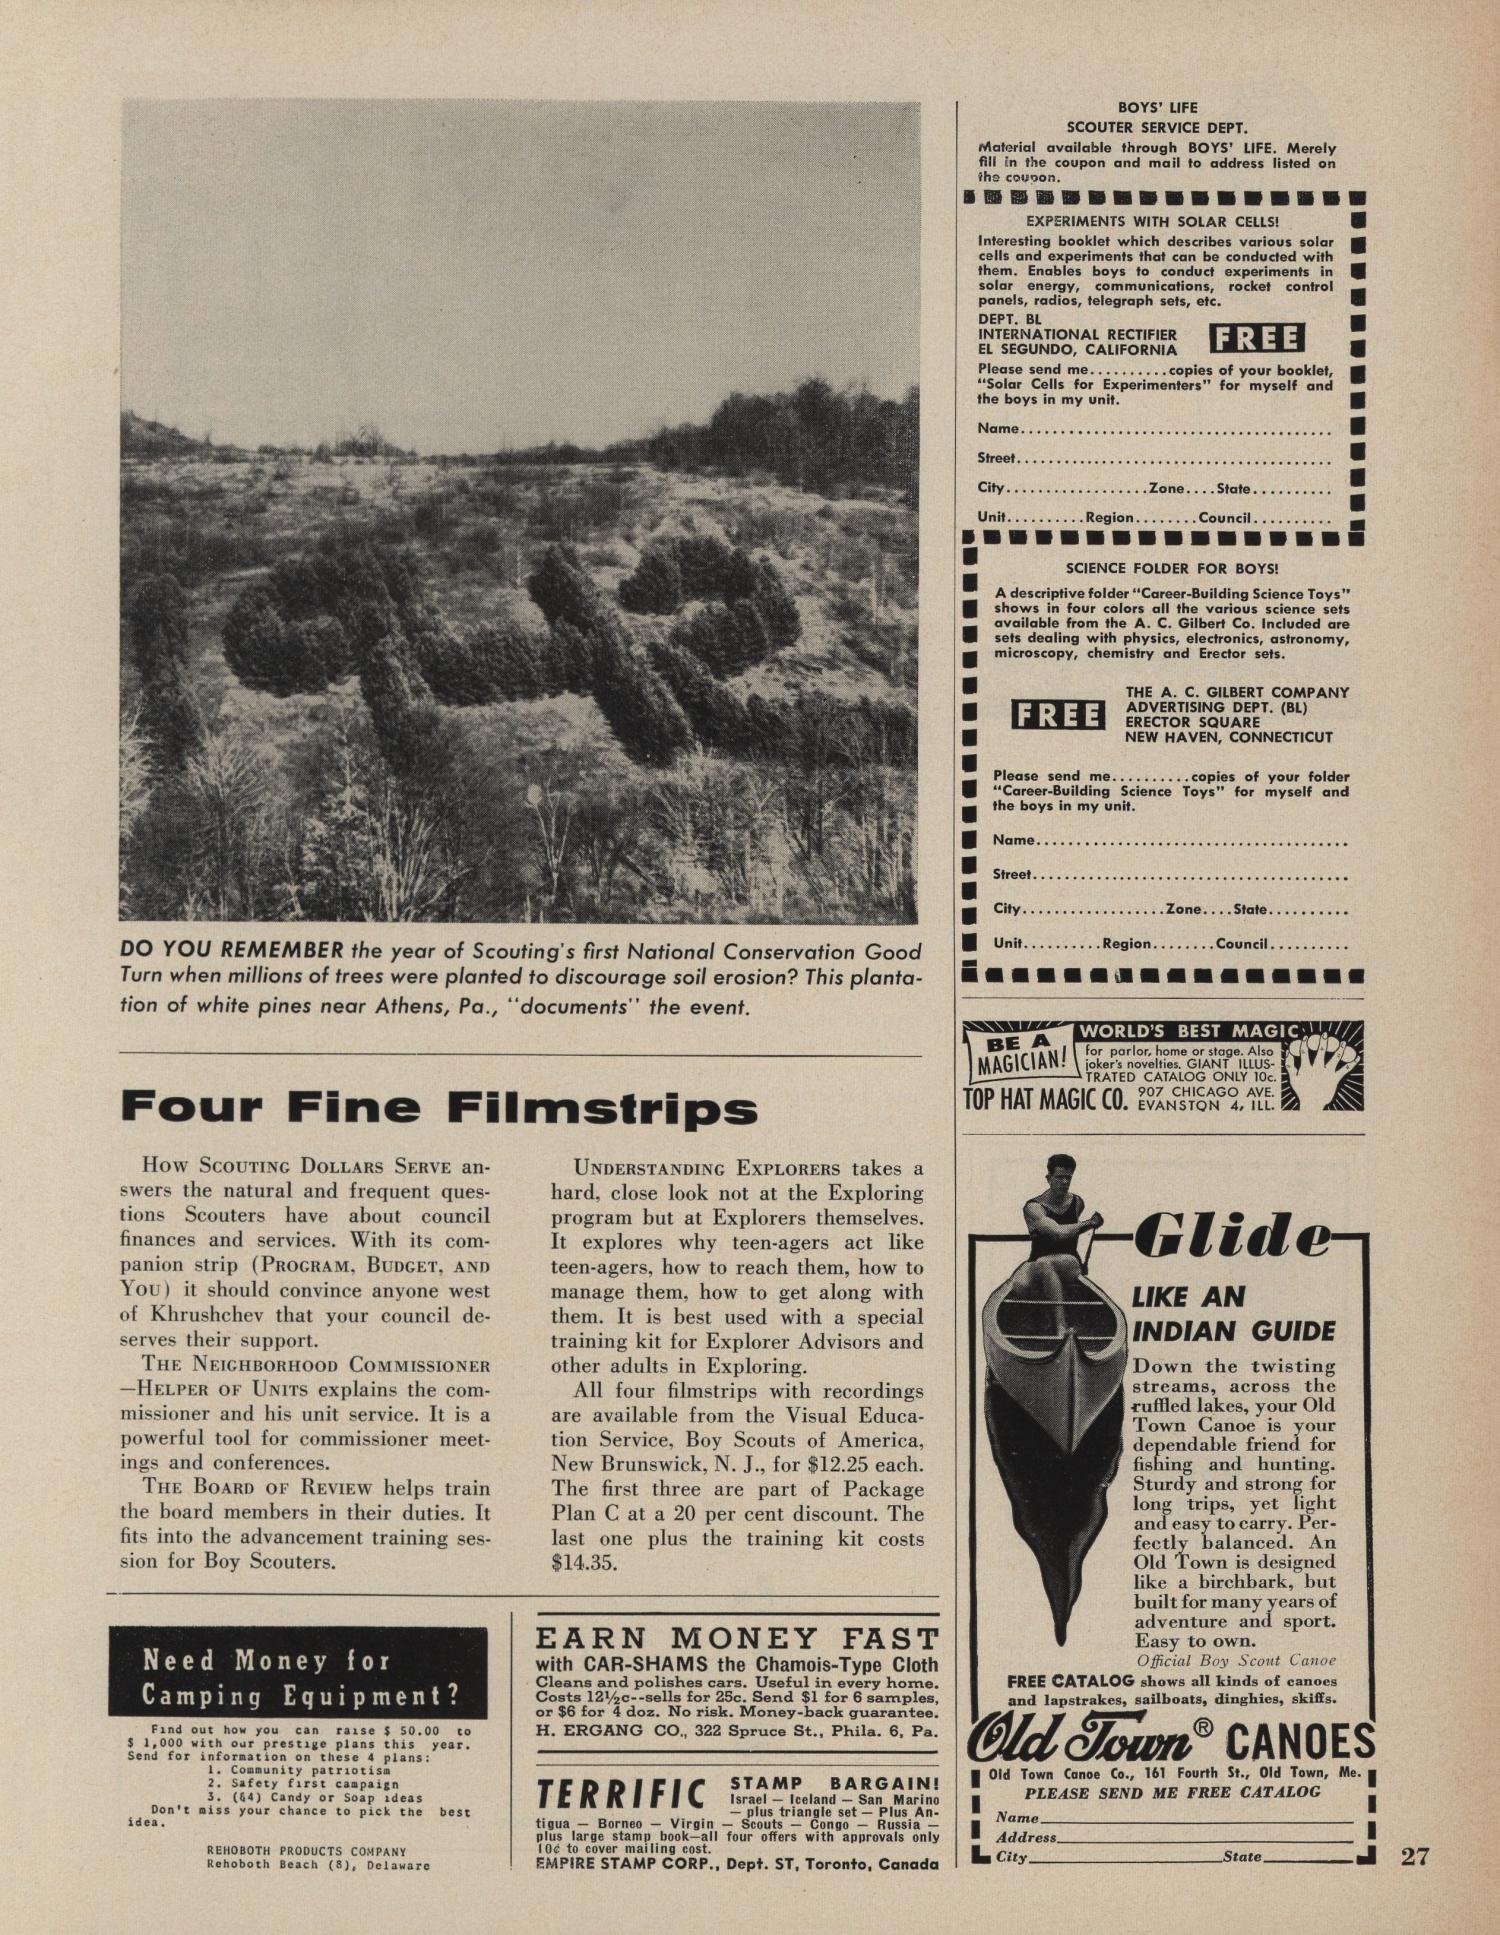 Scouting, Volume 51, Number 1, January 1963
                                                
                                                    27
                                                